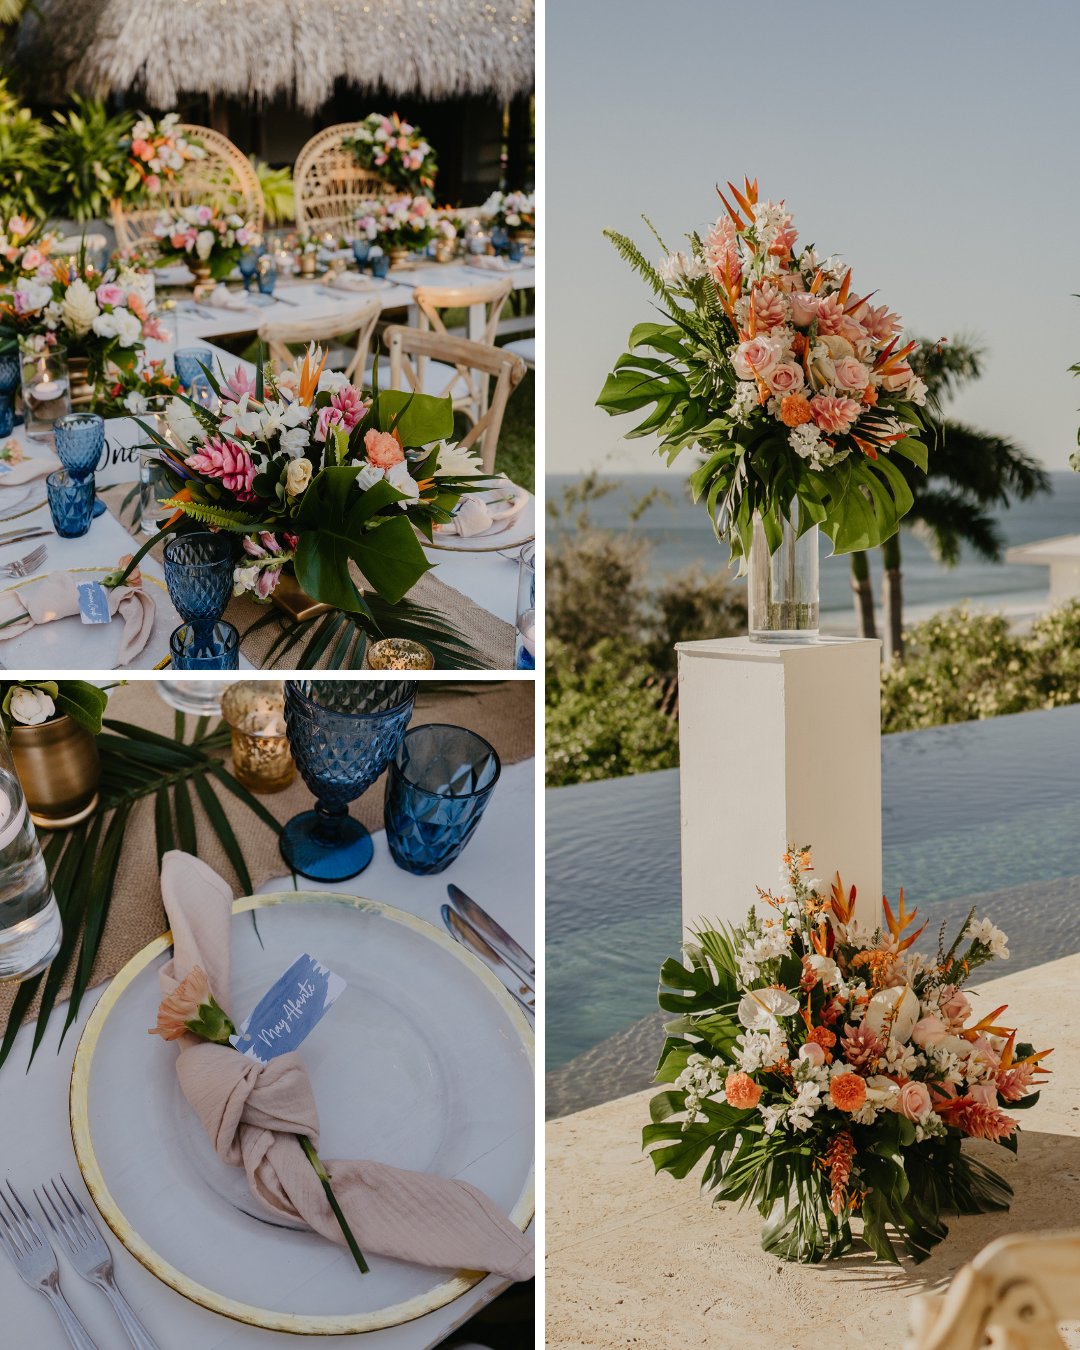 A collage showing a tropical-themed outdoor wedding setup. Tables are adorned with vibrant floral centerpieces of pink, orange, and white flowers among lush greenery, set with blue glassware and elegant place settings. A floral arrangement sits beside a pool with a scenic view.